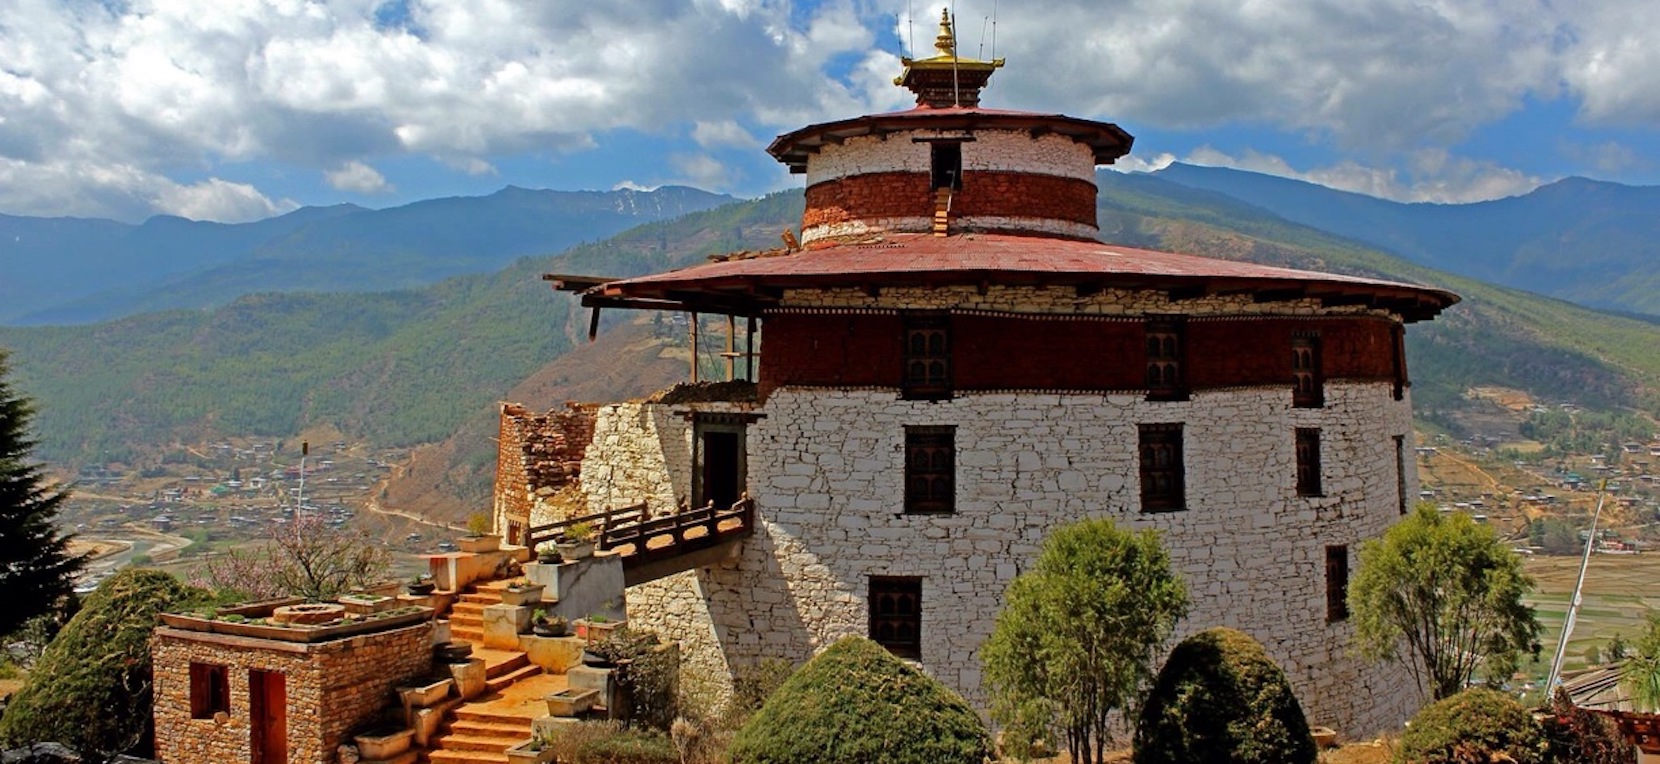 4 Day Tast of Bhutan Premium Private tour (business class flight from Bangkok included) Shoulder Season